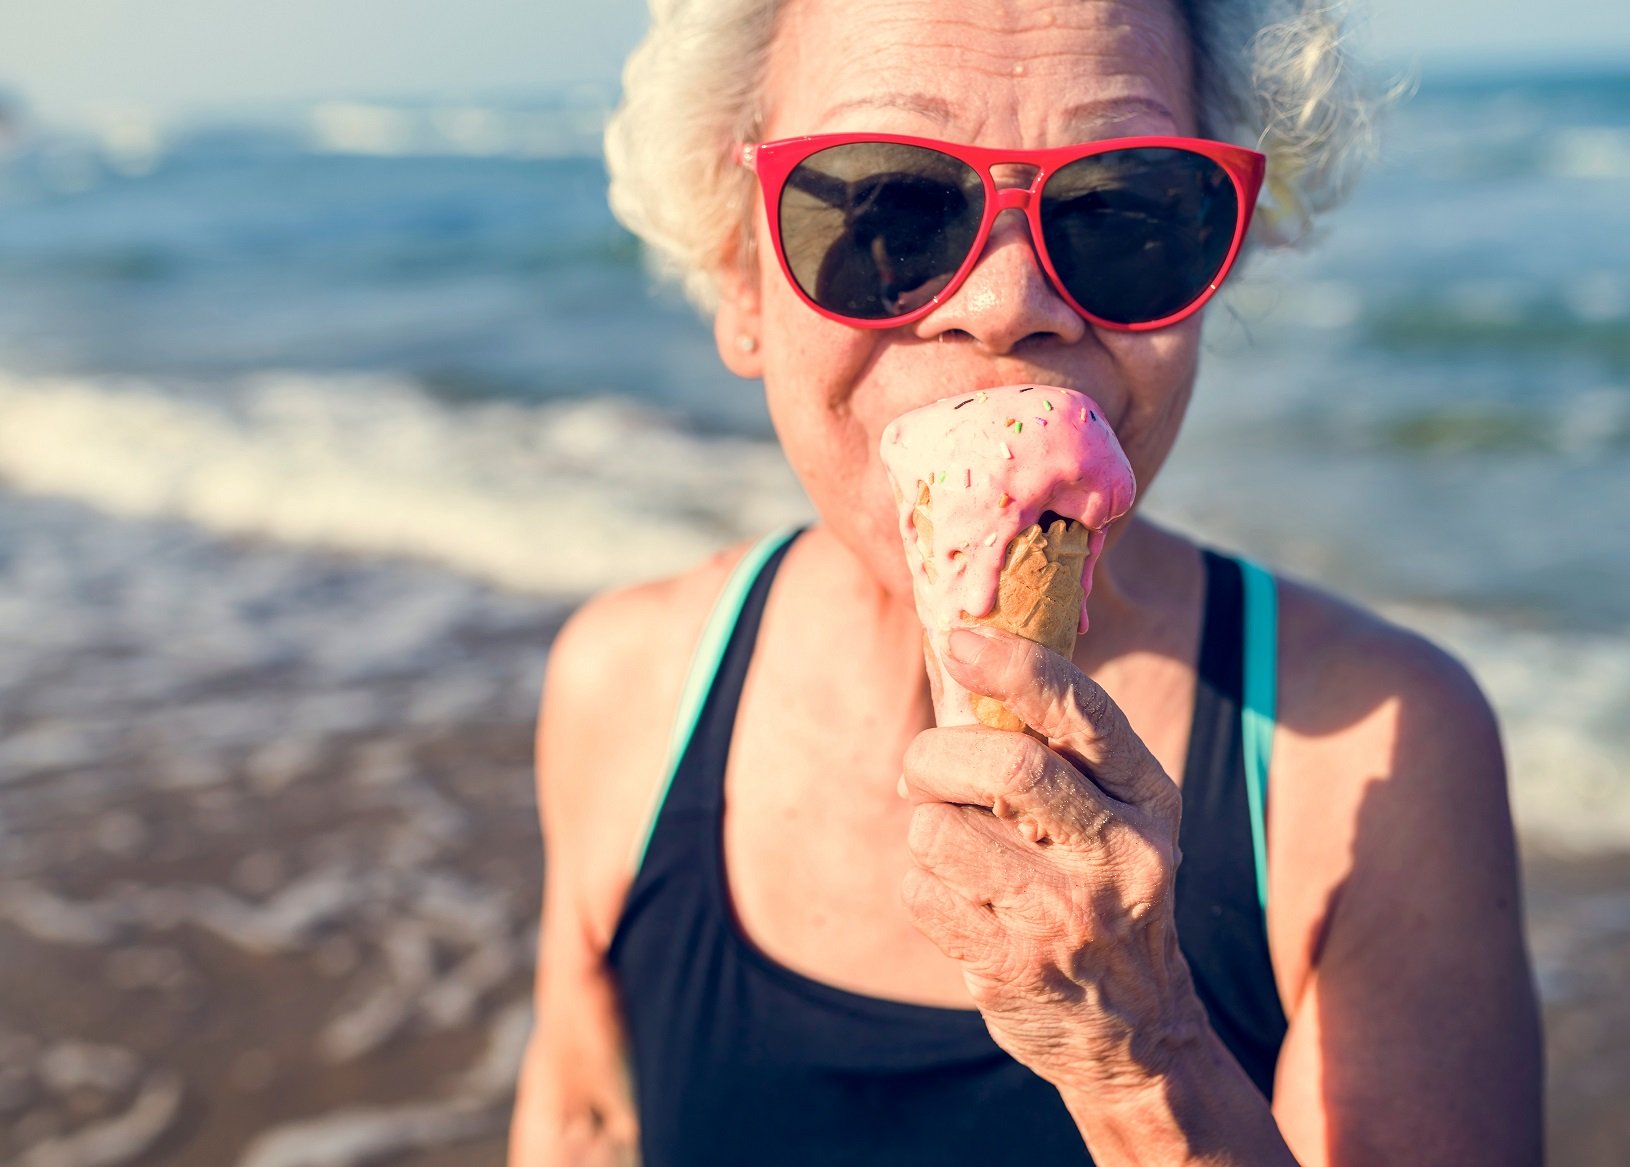 soft foods for Alzheimer's patients, Senior woman eating an ice-cream